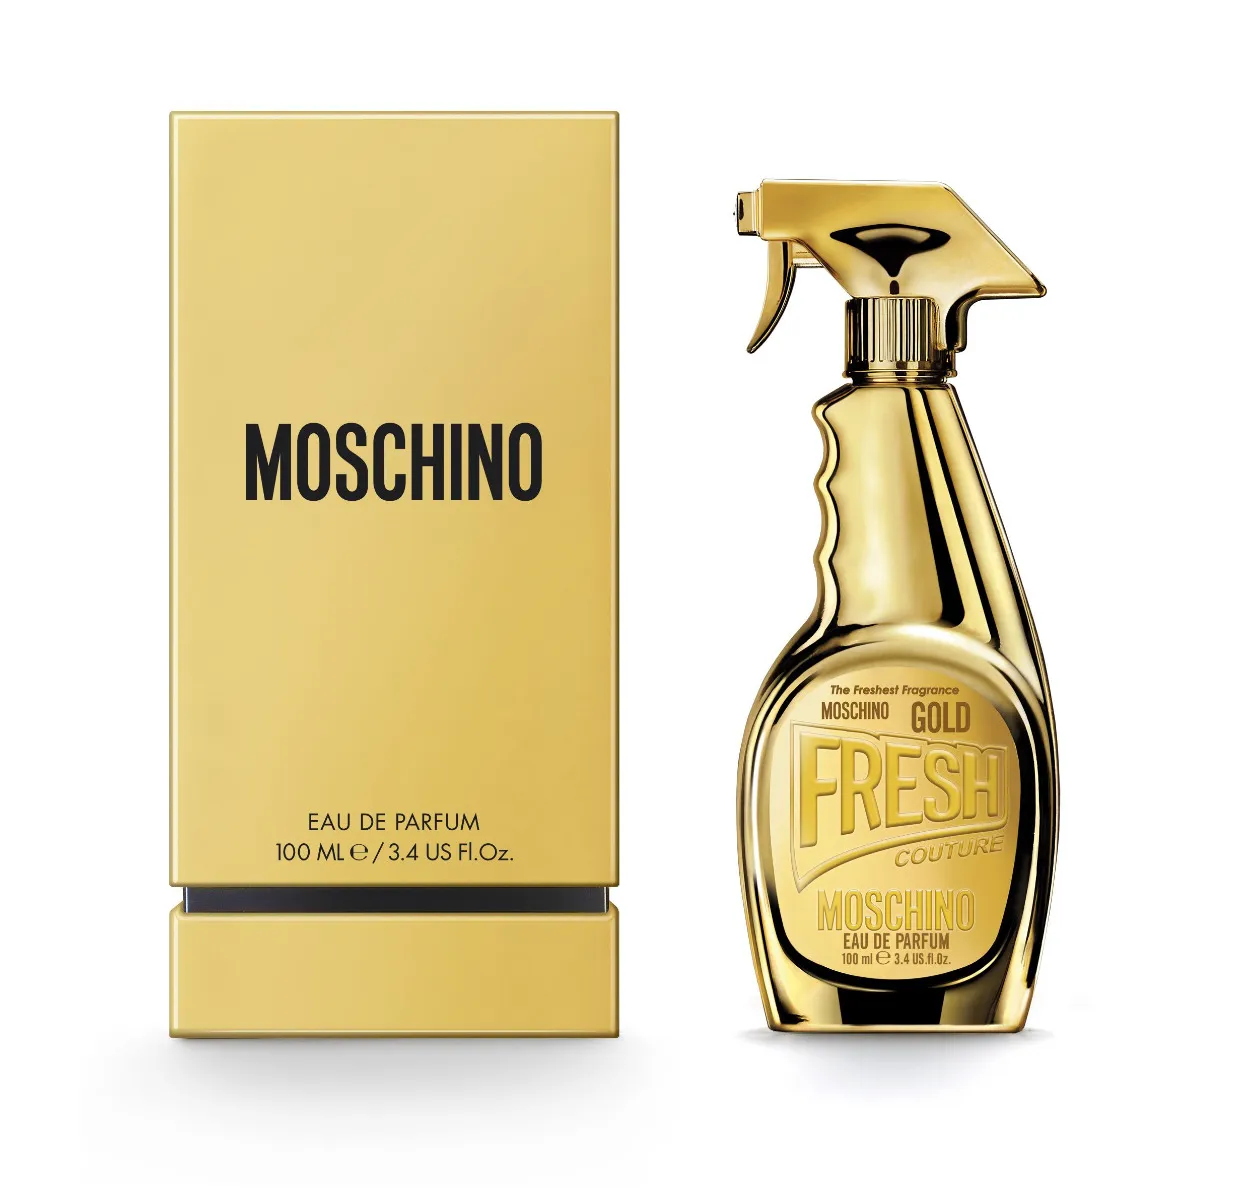 MOSCHINO Fresh Couture Gold